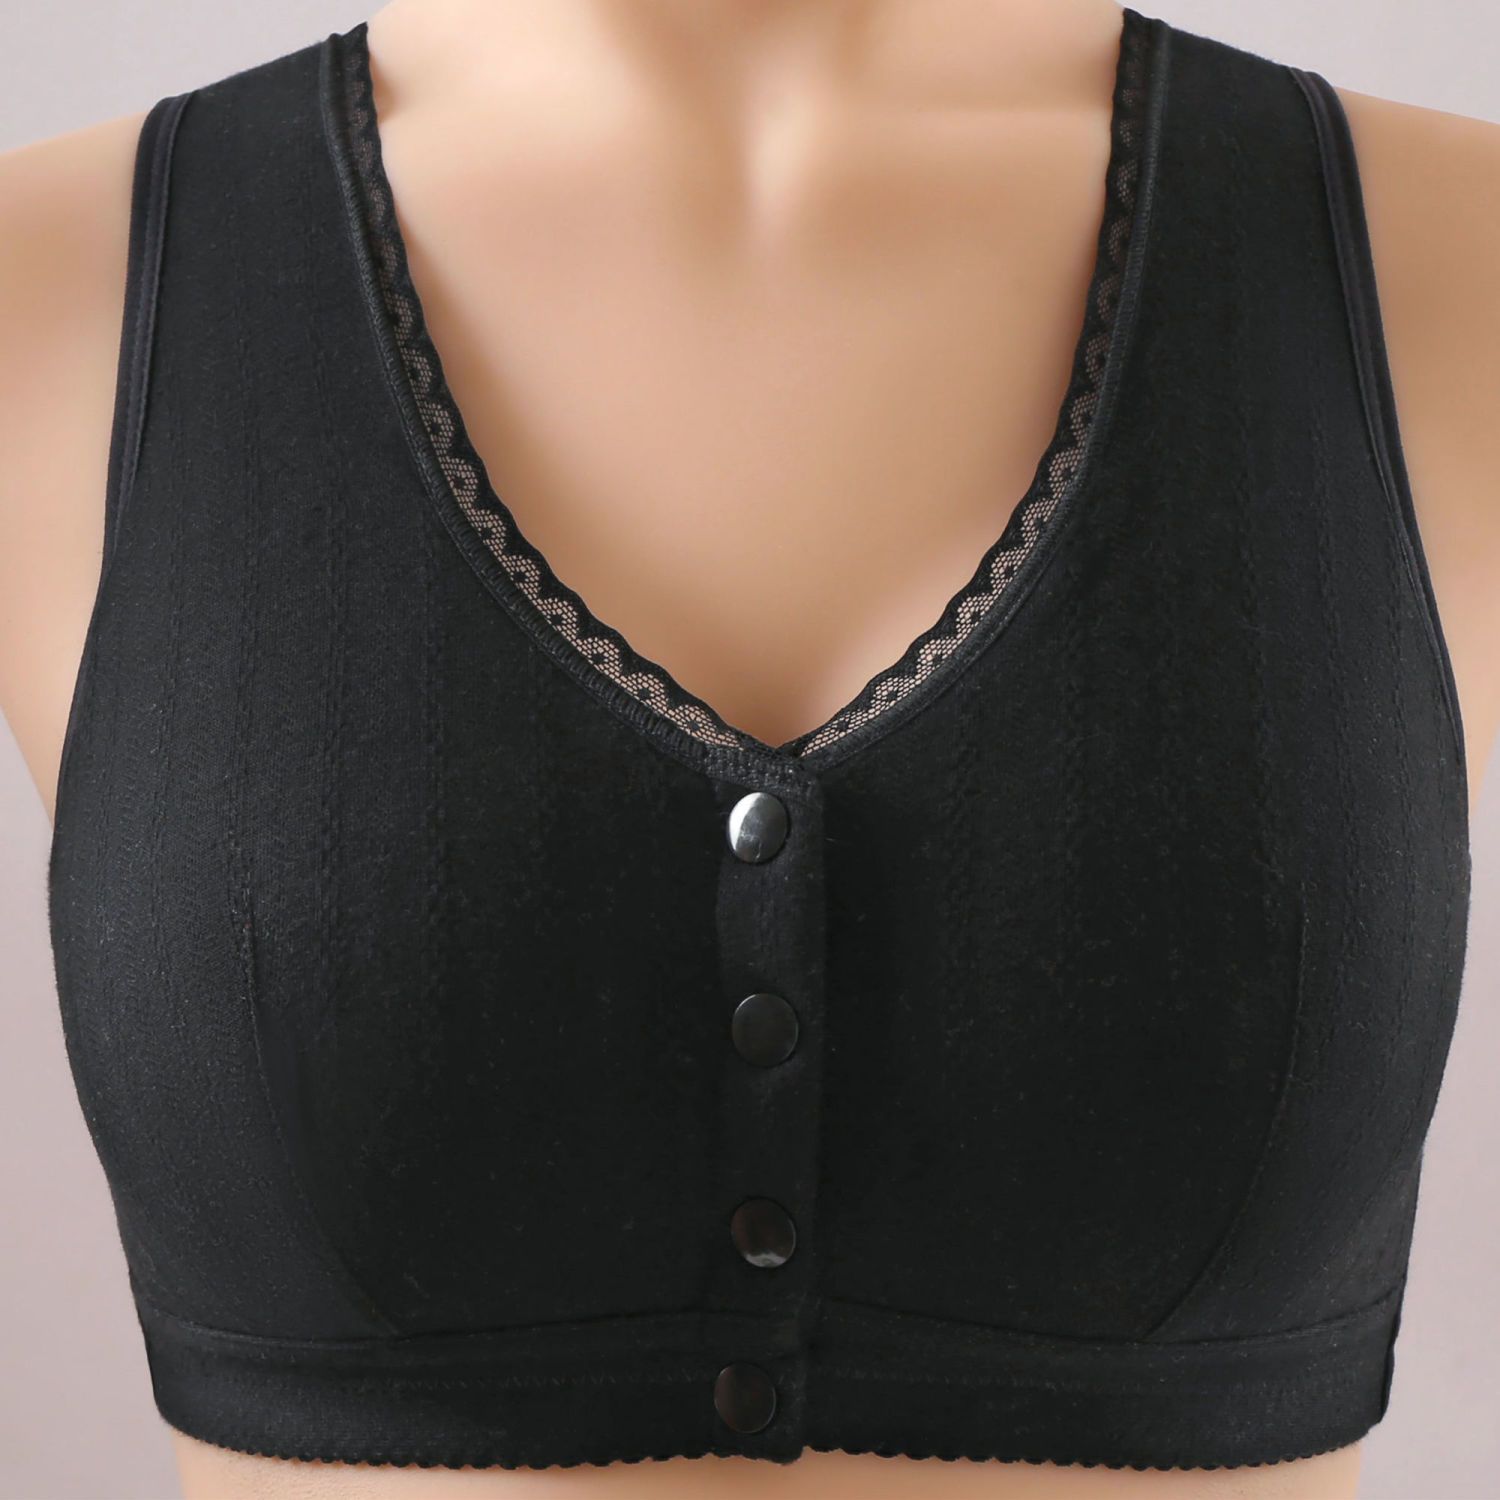 Mother's underwear women's pure cotton large size front buckle bra no steel ring middle-aged and elderly women's vest style large cup breathable thin